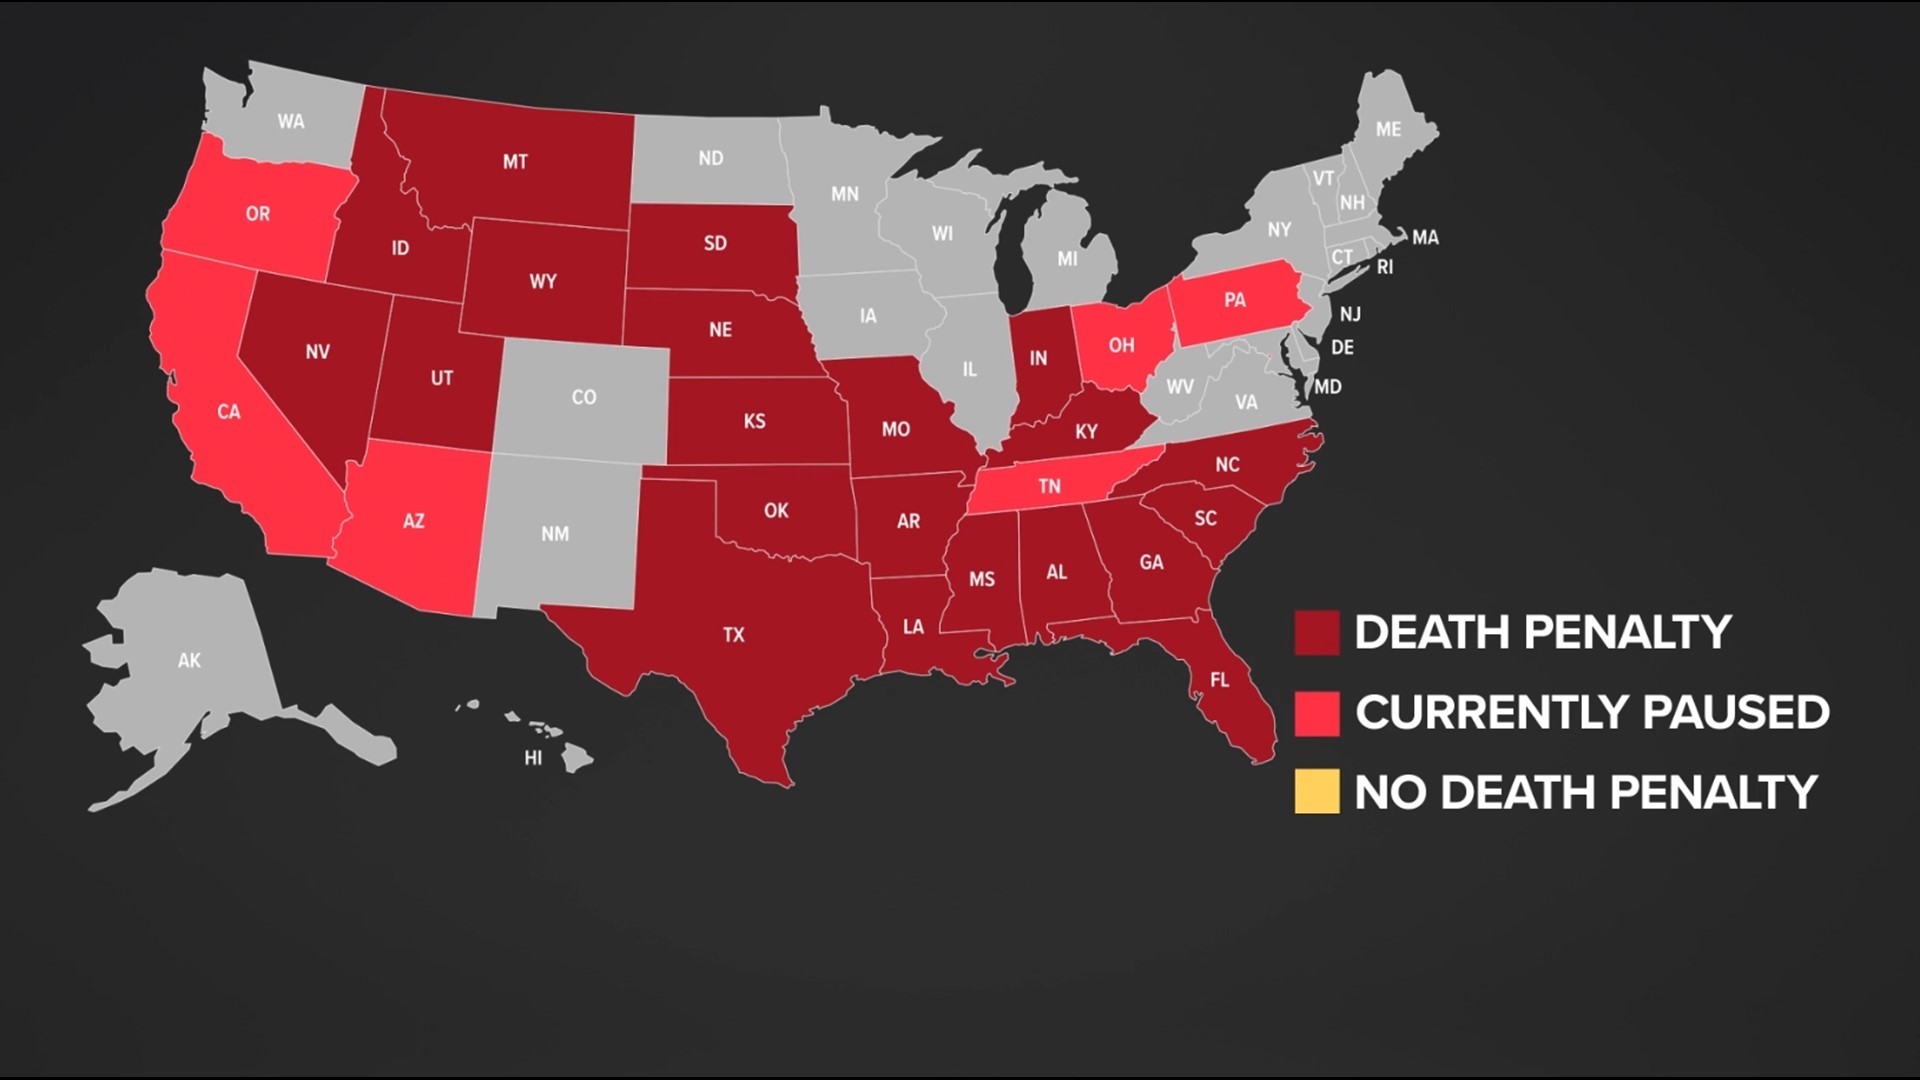 Graphic displaying what states have death penalties and which do not.